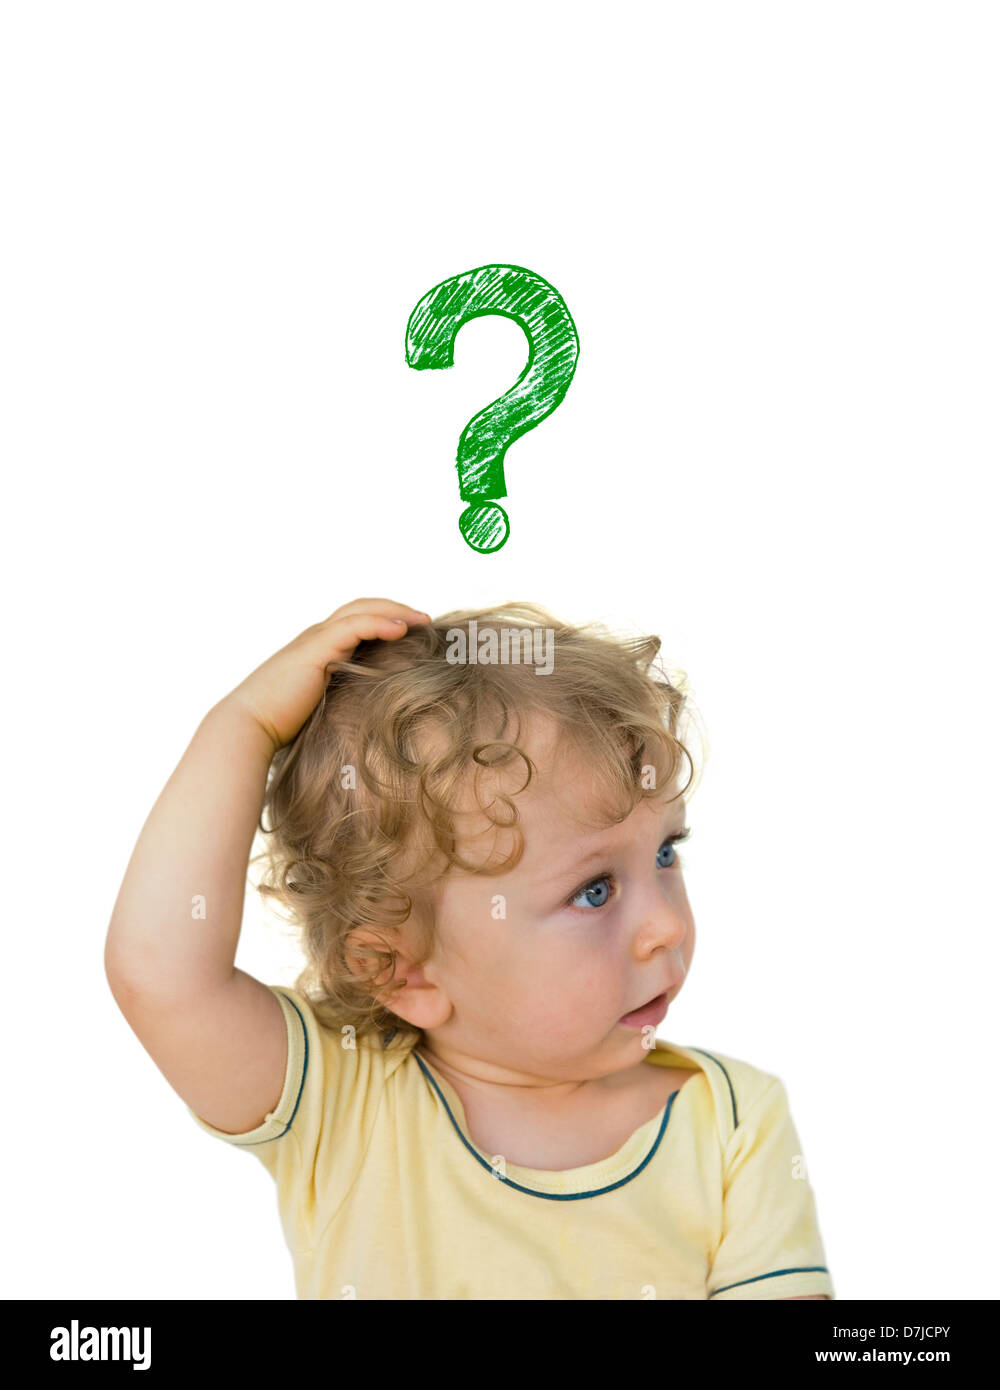 cute toddler child scratching his head green question mark above isolated on white background Stock Photo